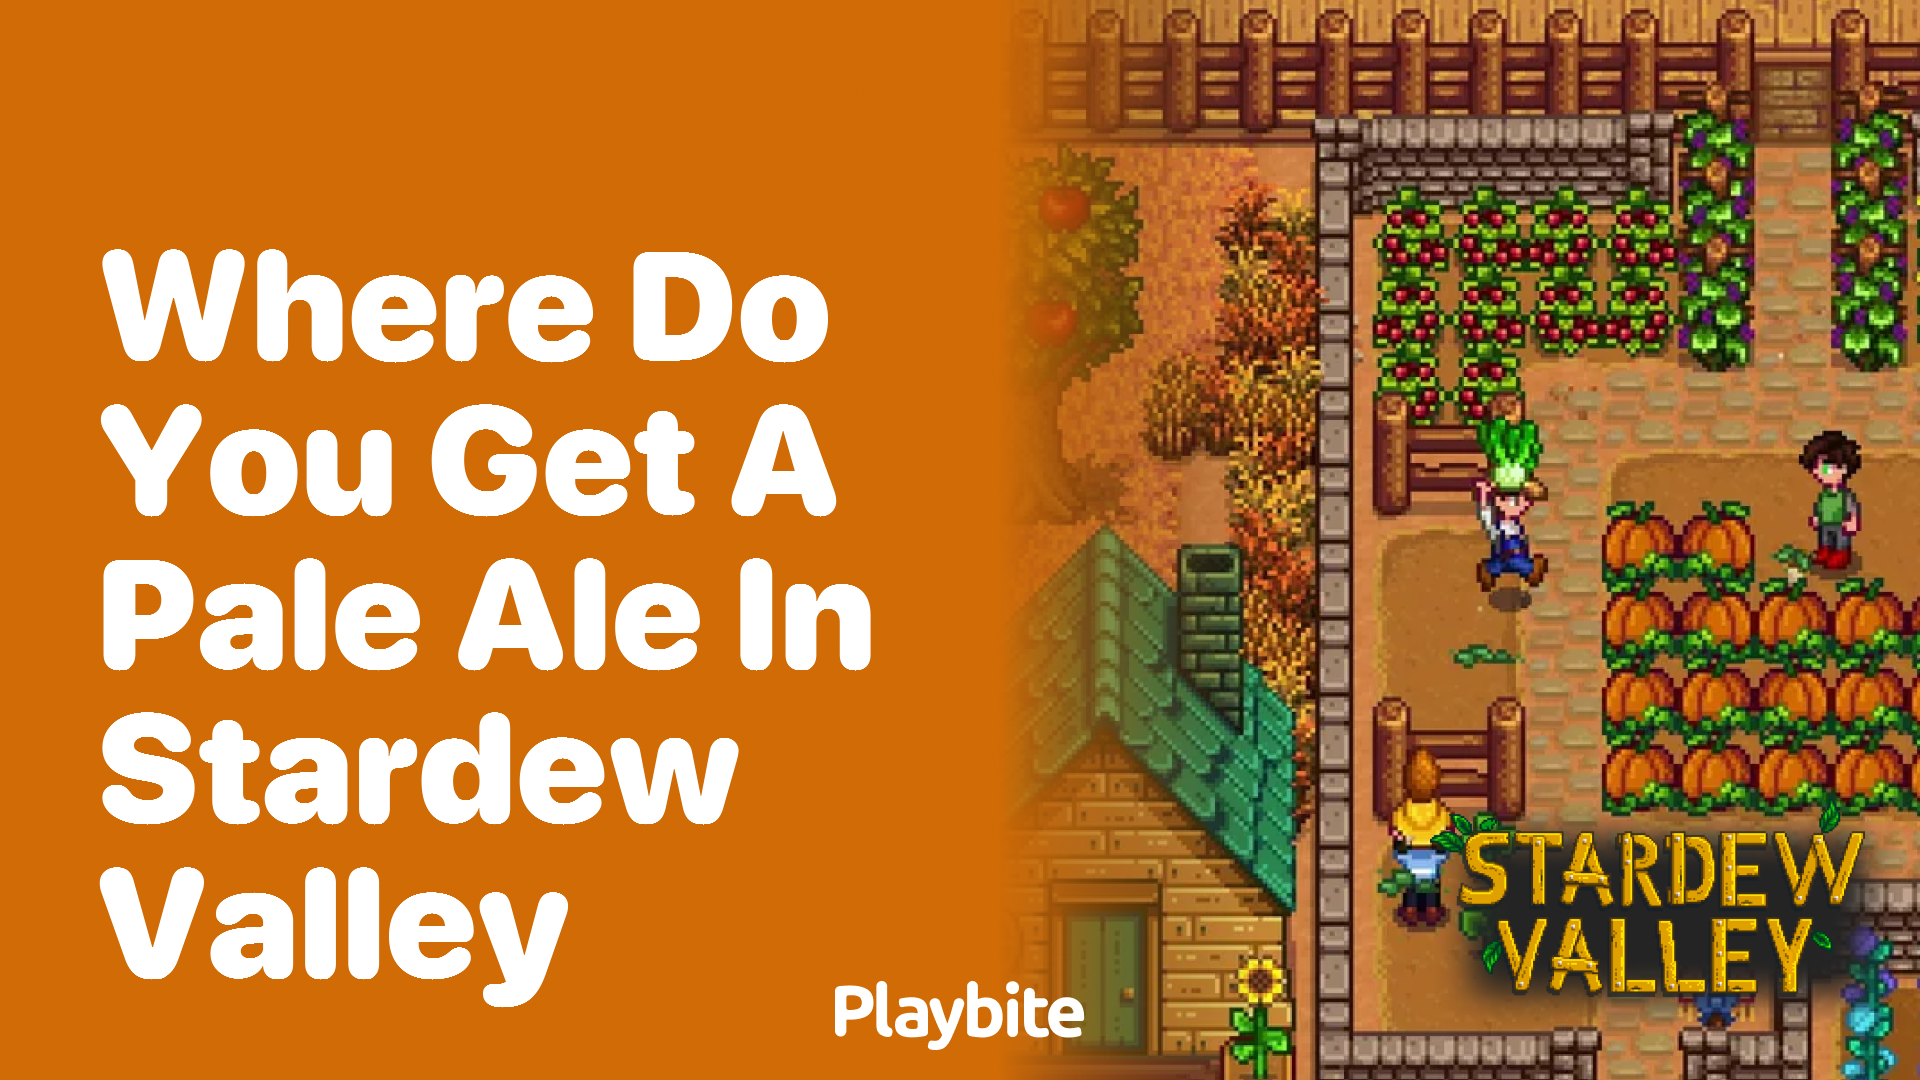 Where Do You Get a Pale Ale in Stardew Valley?